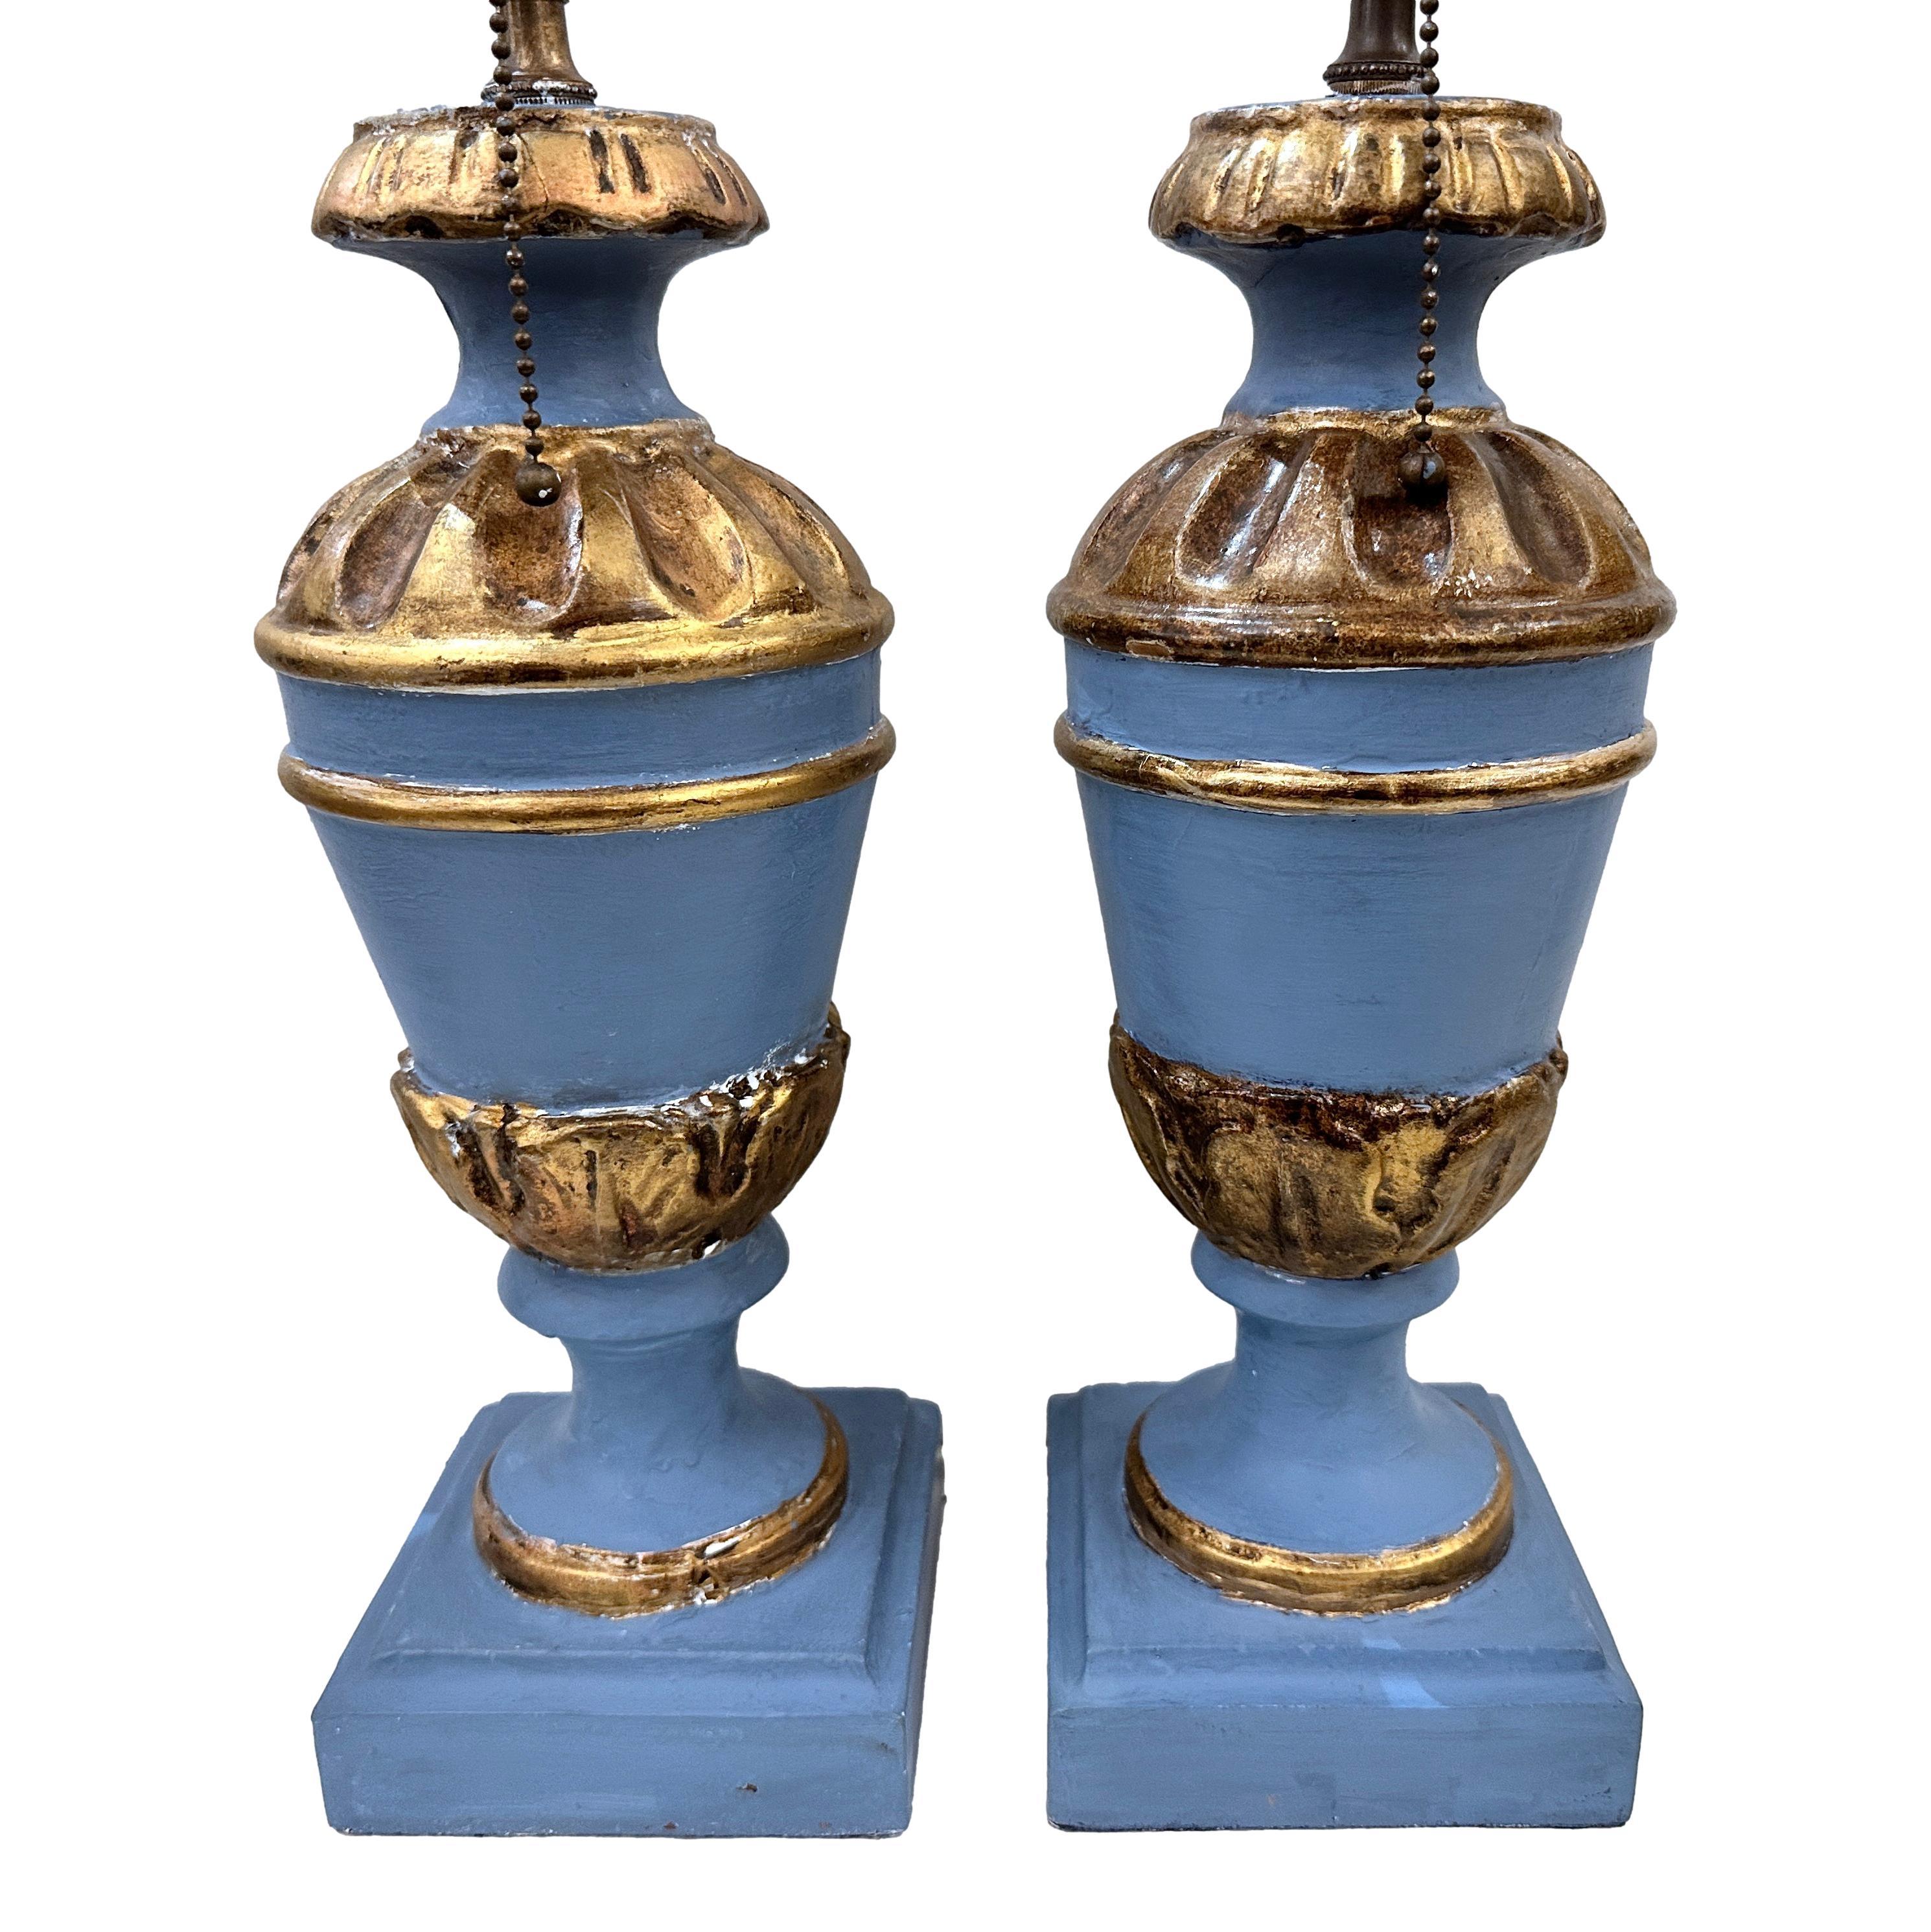 Pair of Italian circa 1920's painted and gilt wood table lamps with pedestal base.

Measurements: 
Height of body: 14